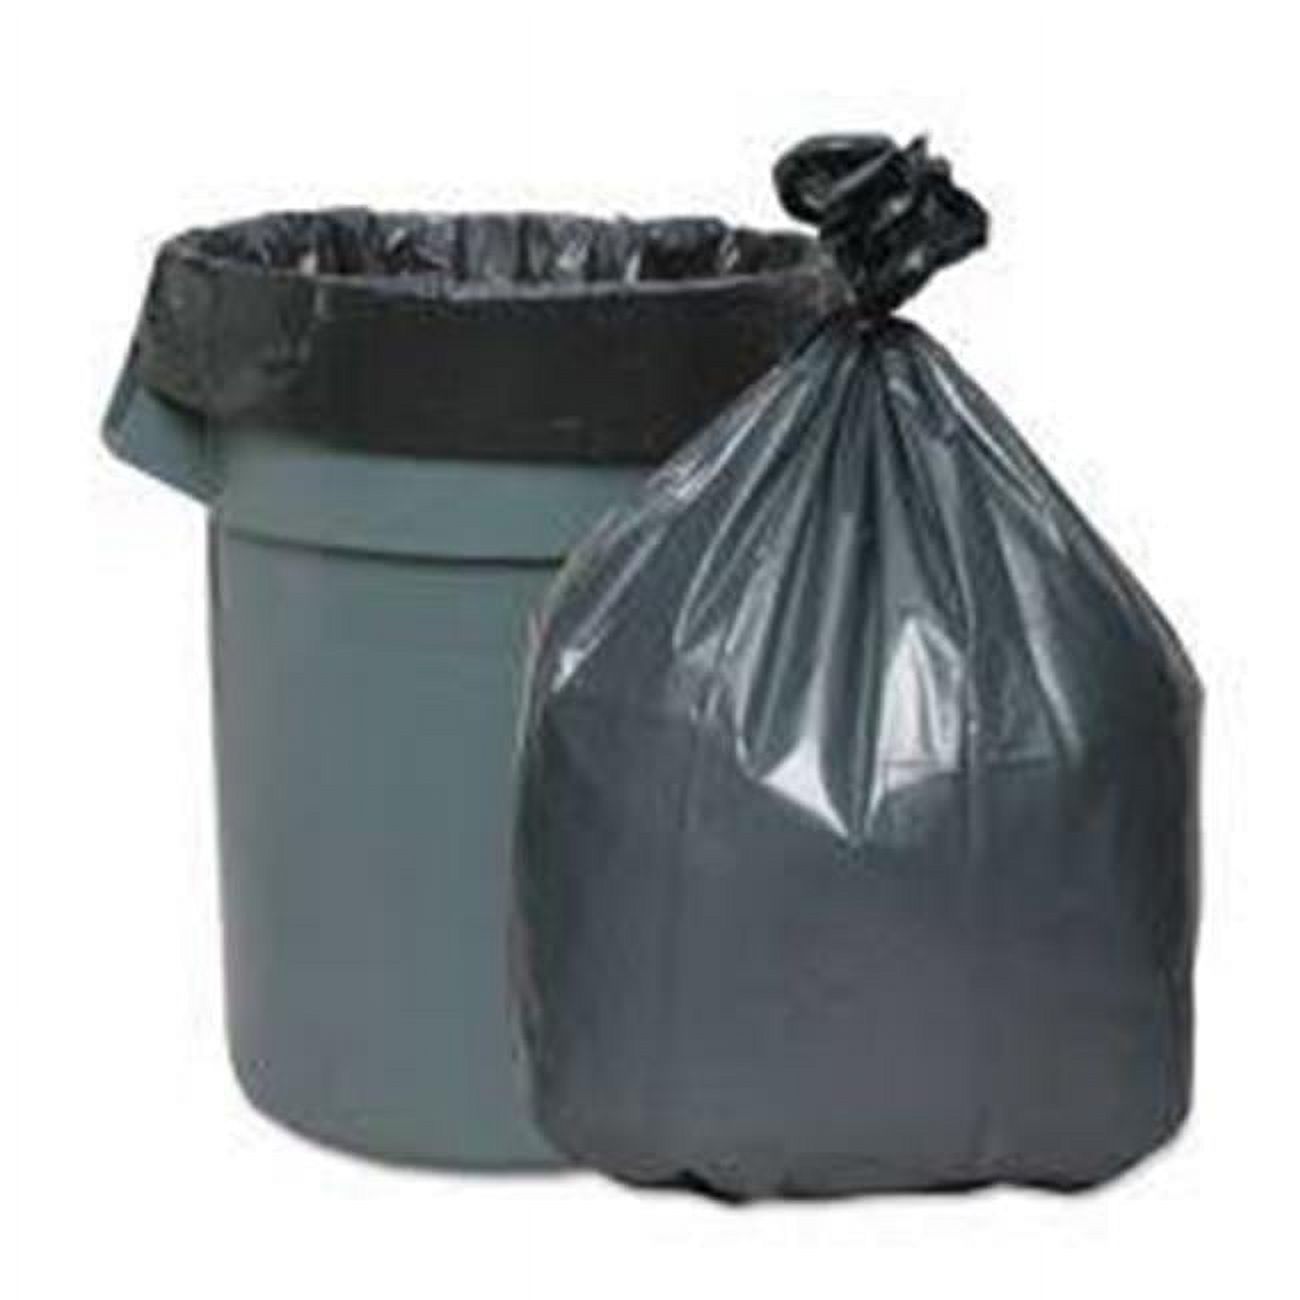 Webster Can Liners - 60 gal Capacity - Black - 100/Carton - Waste Disposal - image 1 of 2